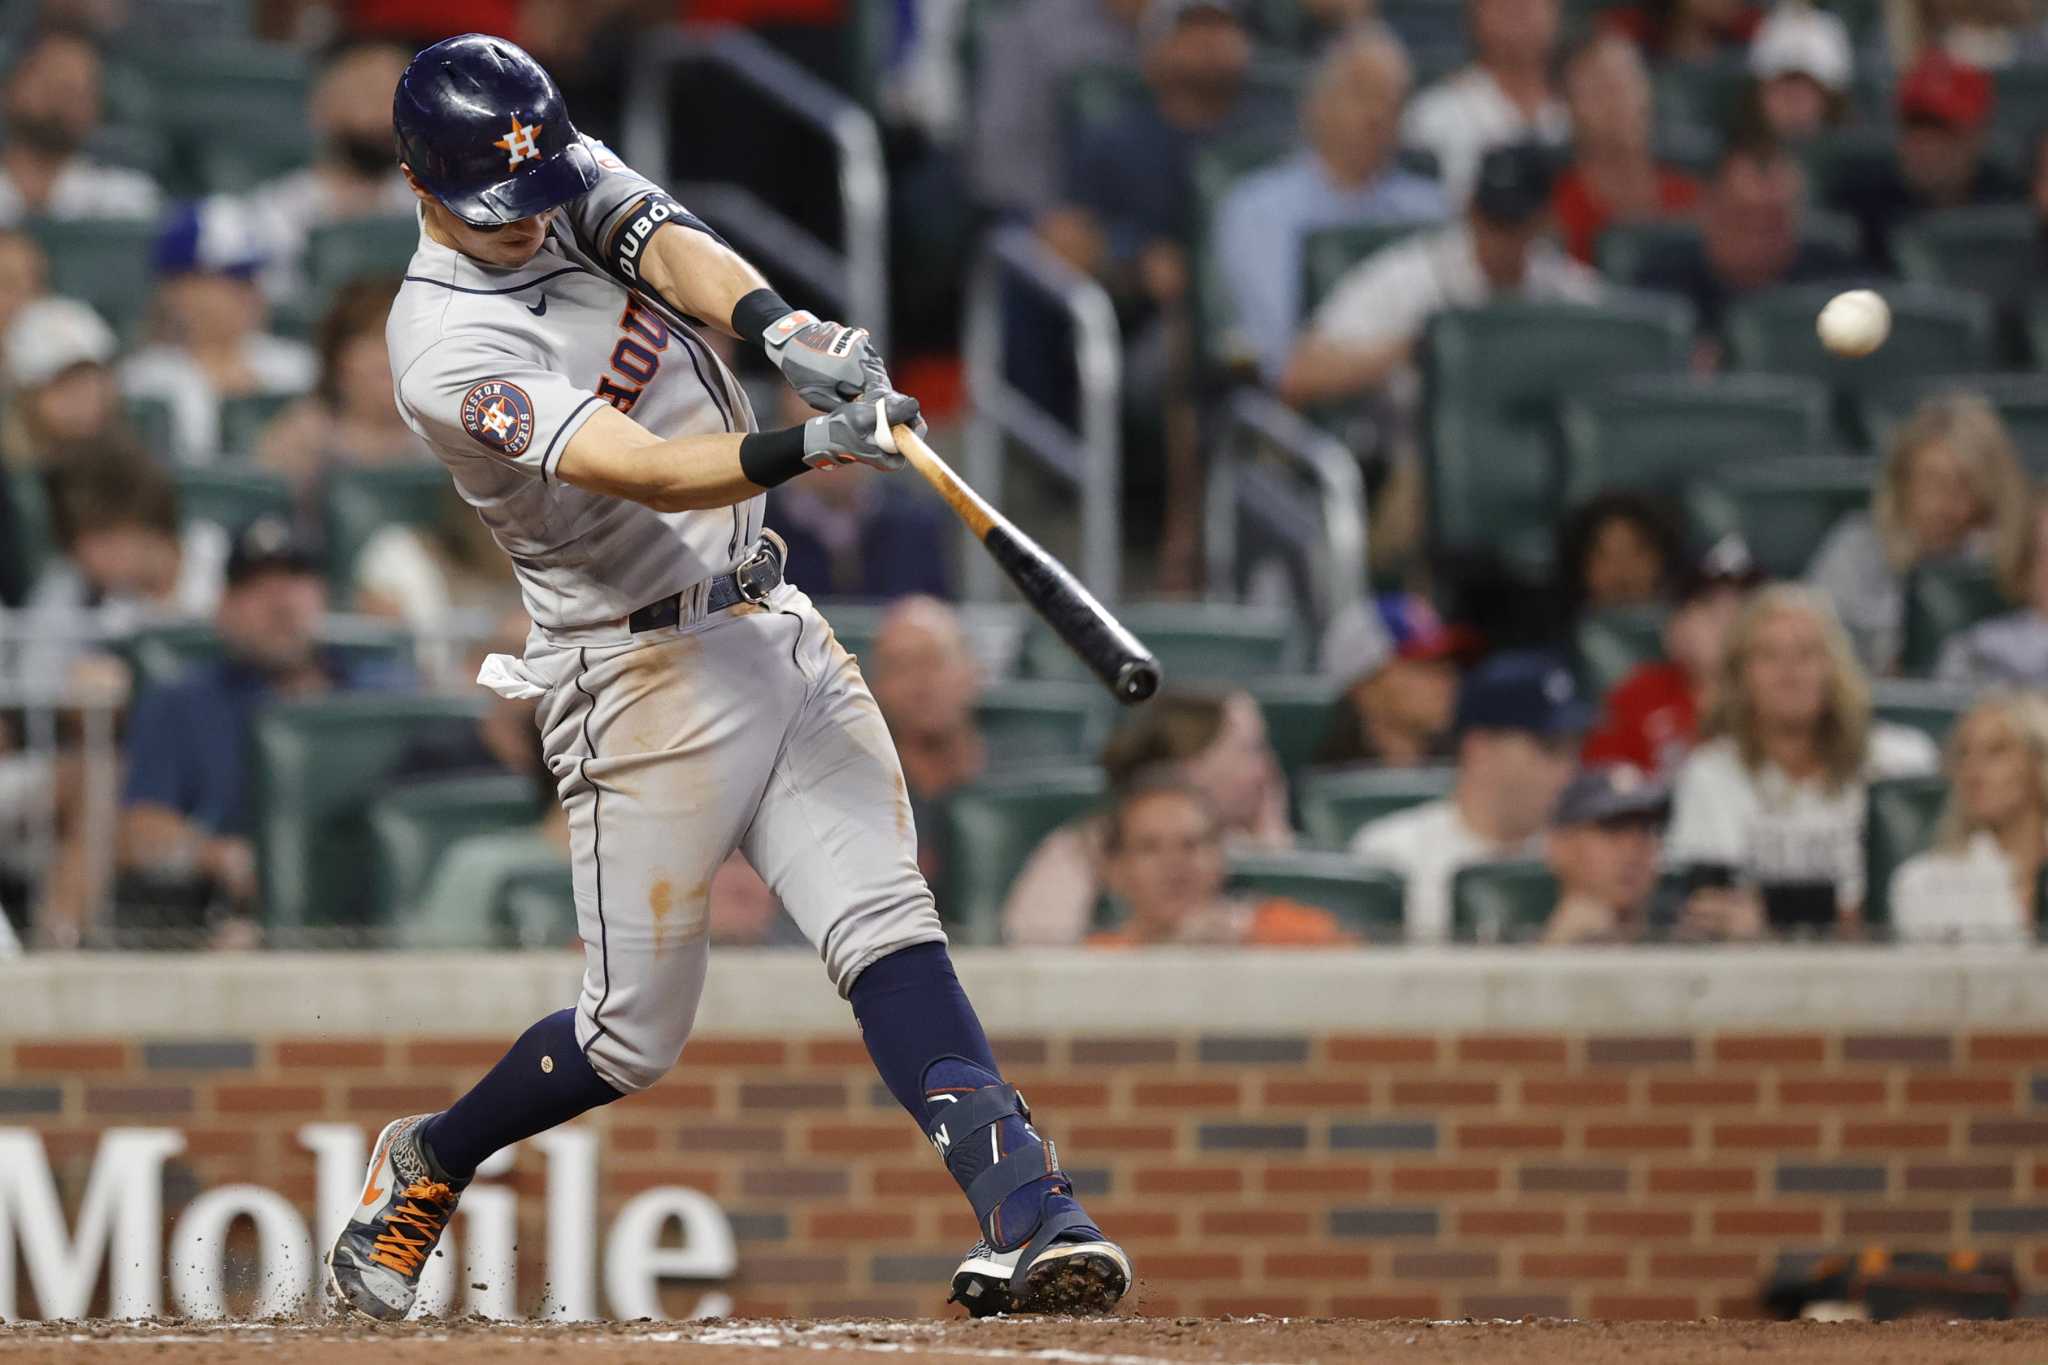 Astros: What's better than hits for Mauricio Dubon? 'More hits.